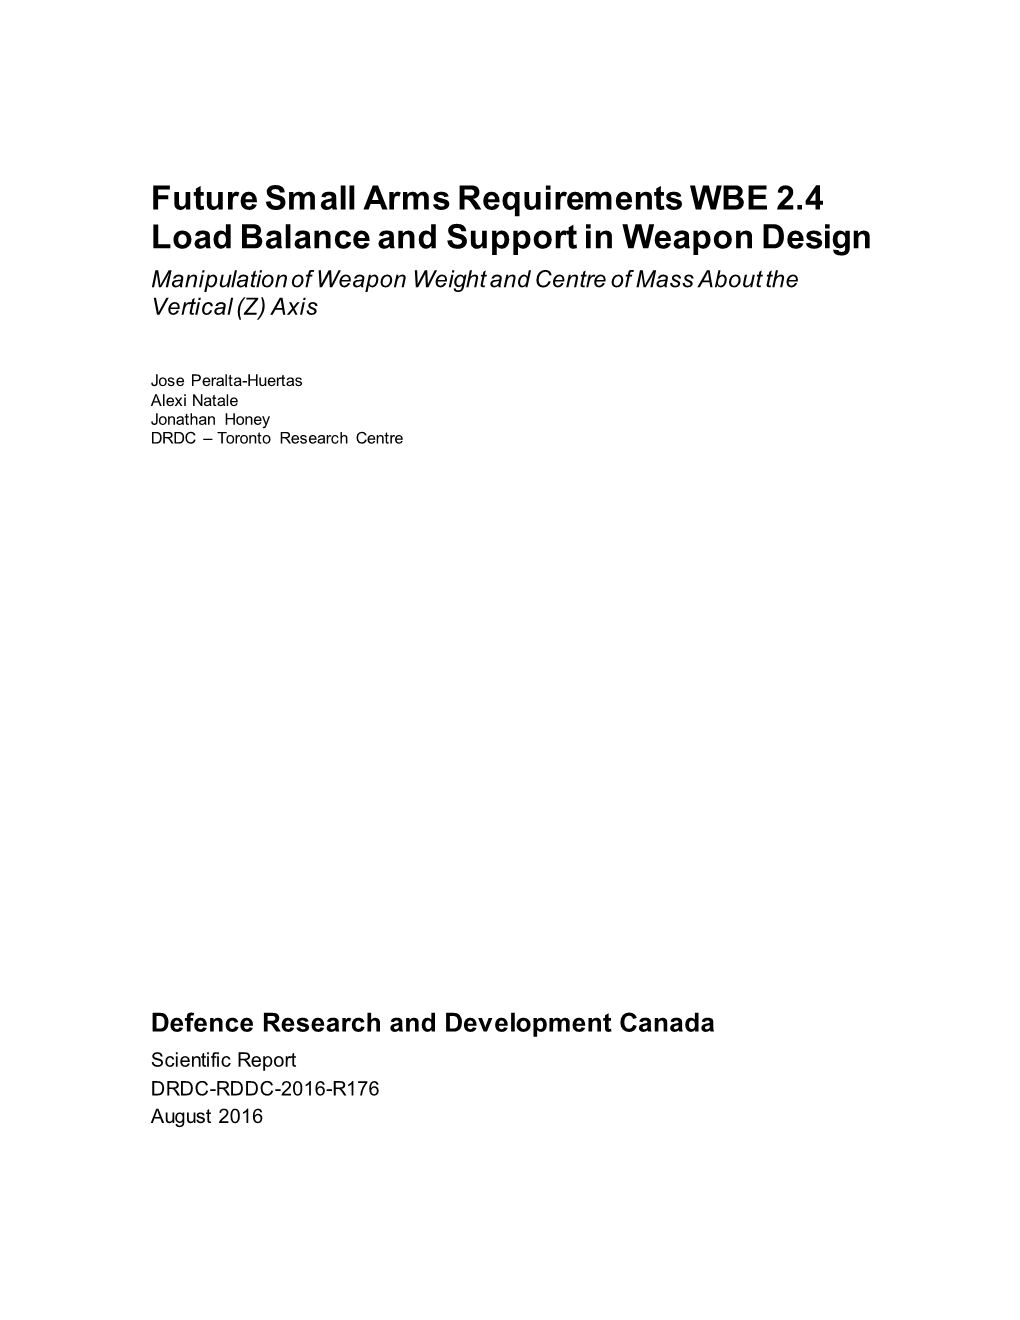 Future Small Arms Requirements WBE 2.4 Load Balance and Support in Weapon Design Manipulation of Weapon Weight and Centre of Mass About the Vertical (Z) Axis